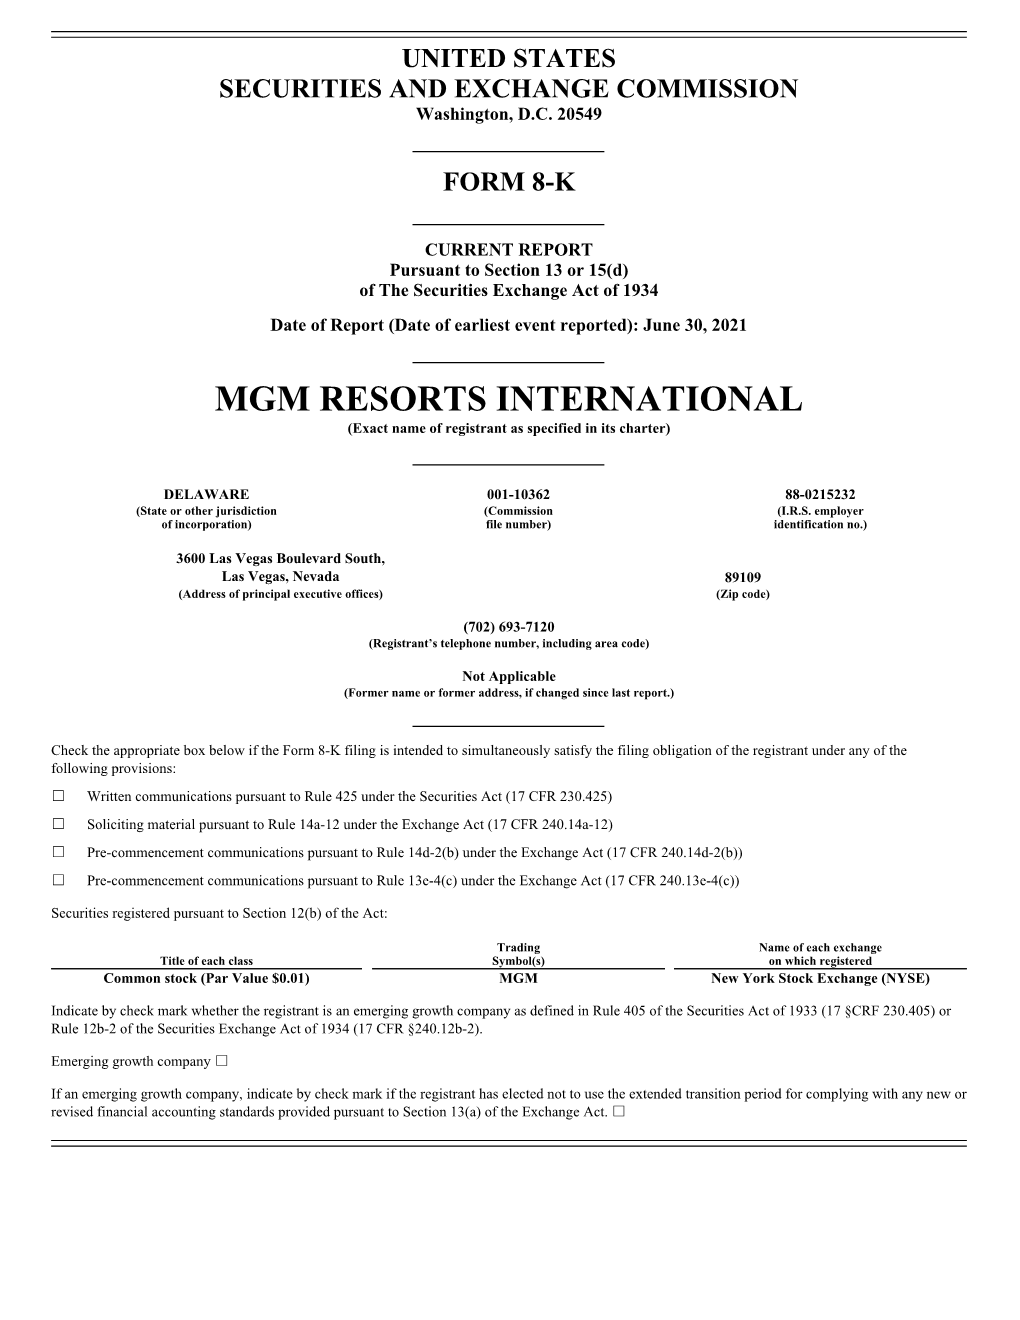 MGM RESORTS INTERNATIONAL (Exact Name of Registrant As Specified in Its Charter)